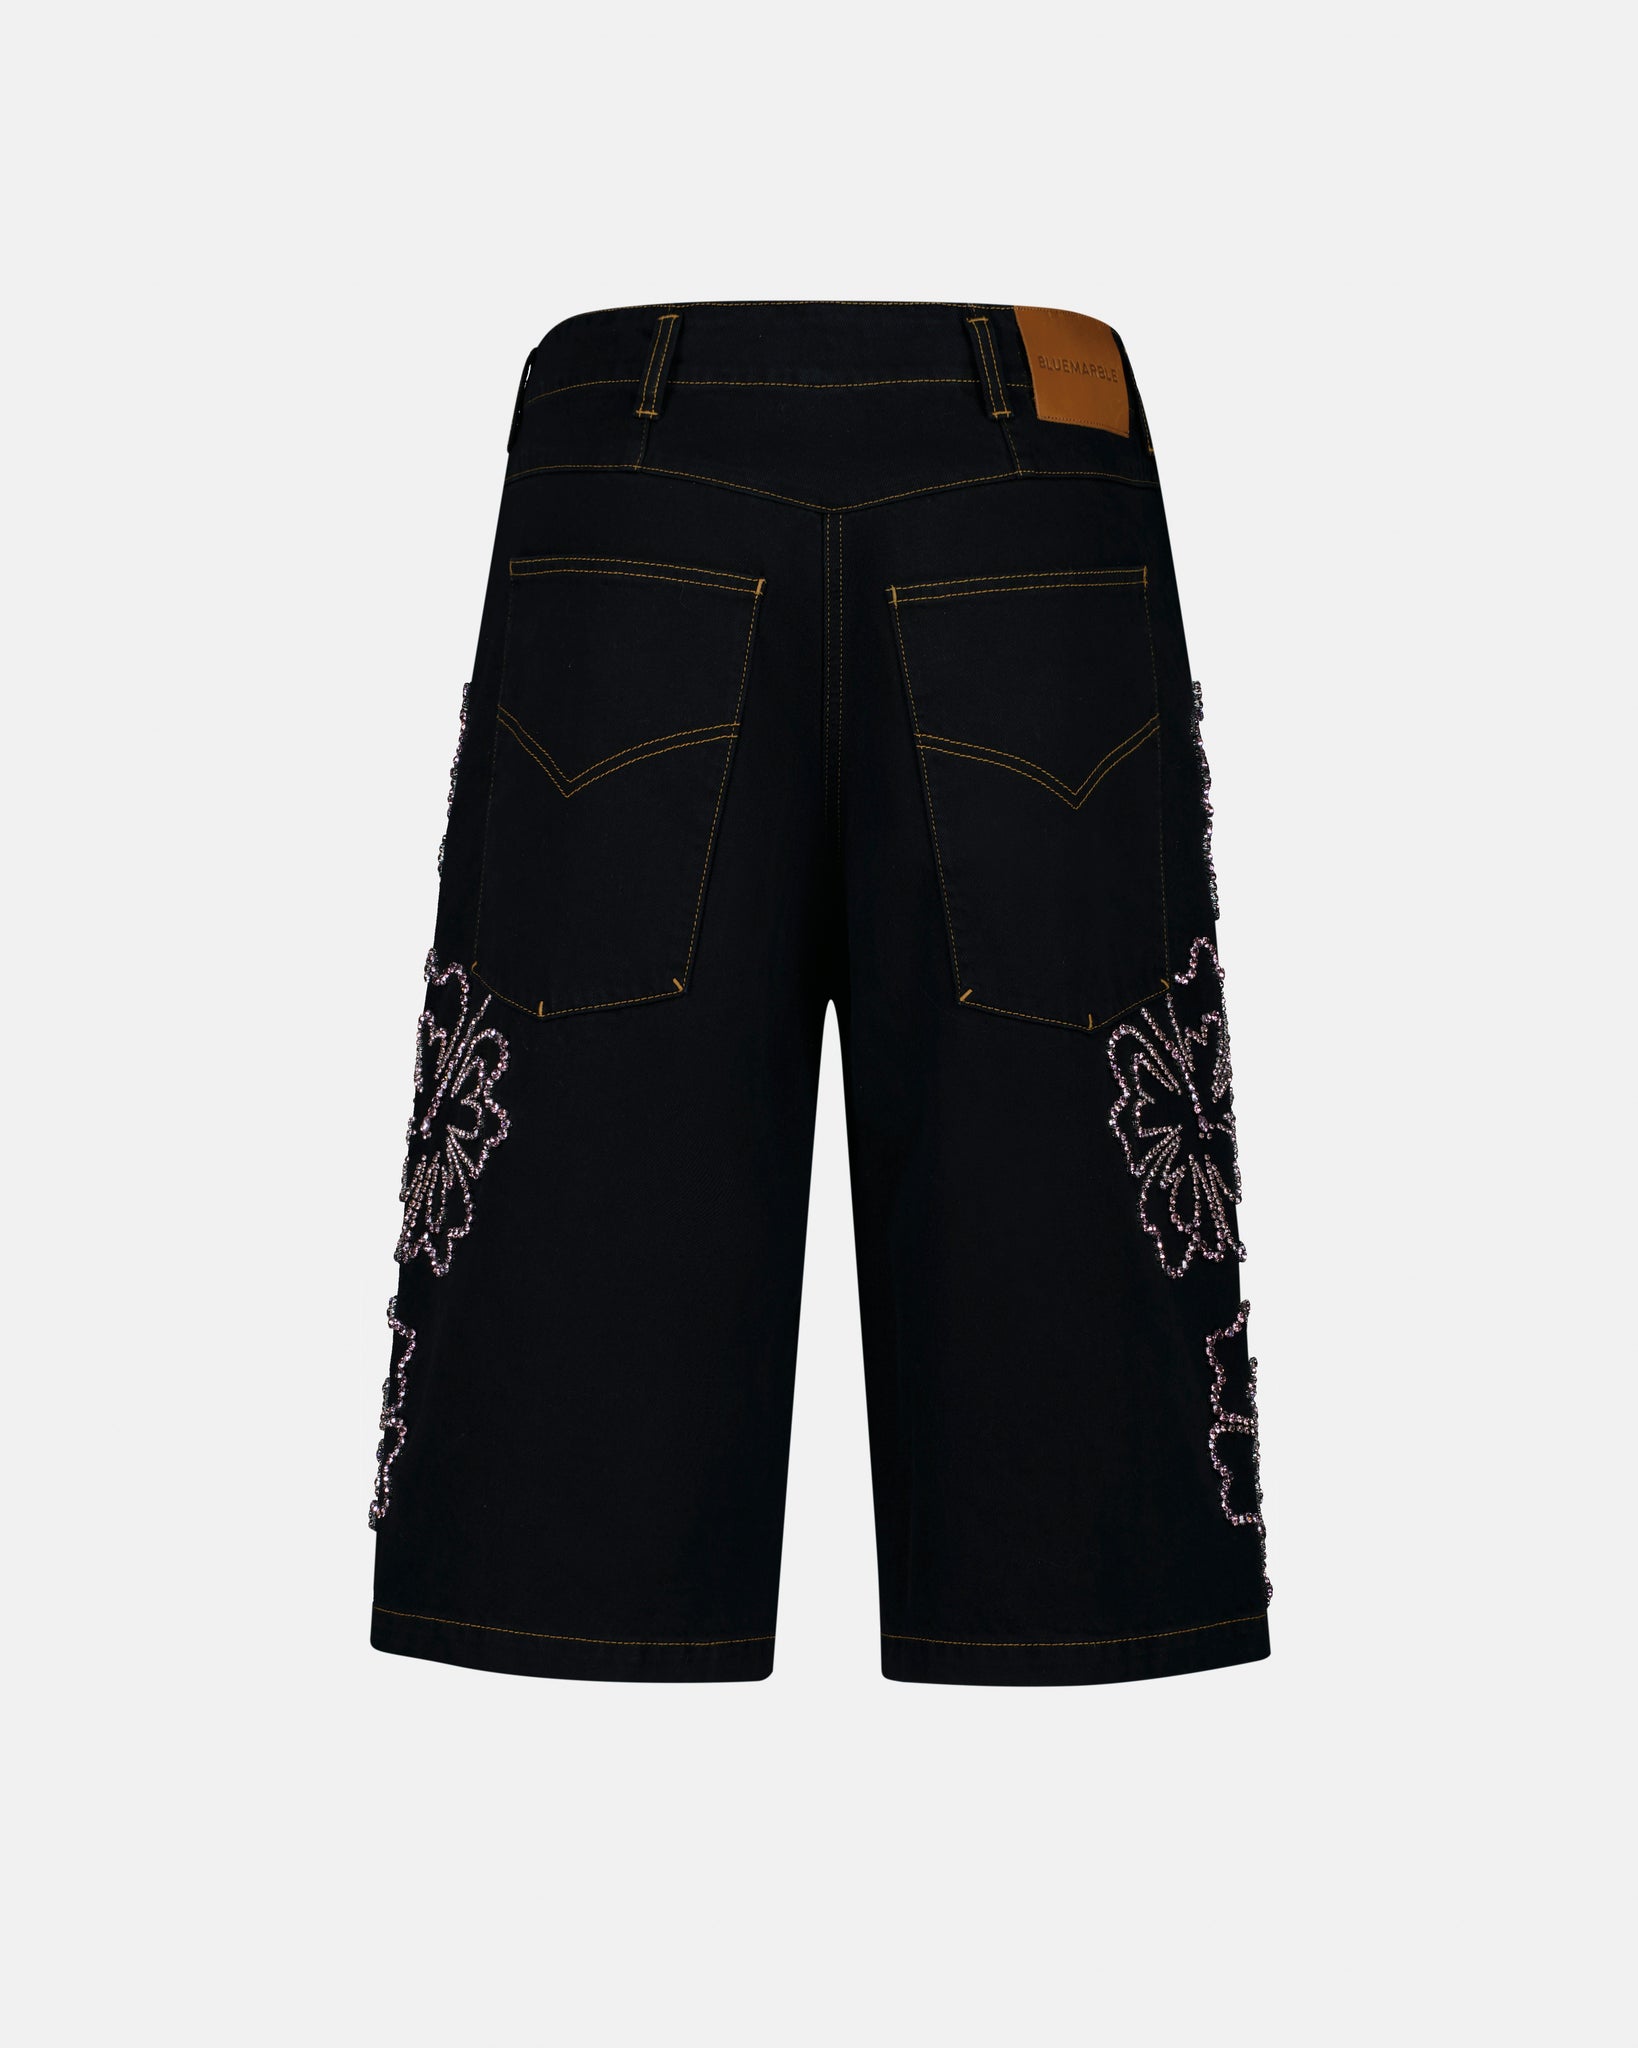 Black Embroidered Baggy Shorts